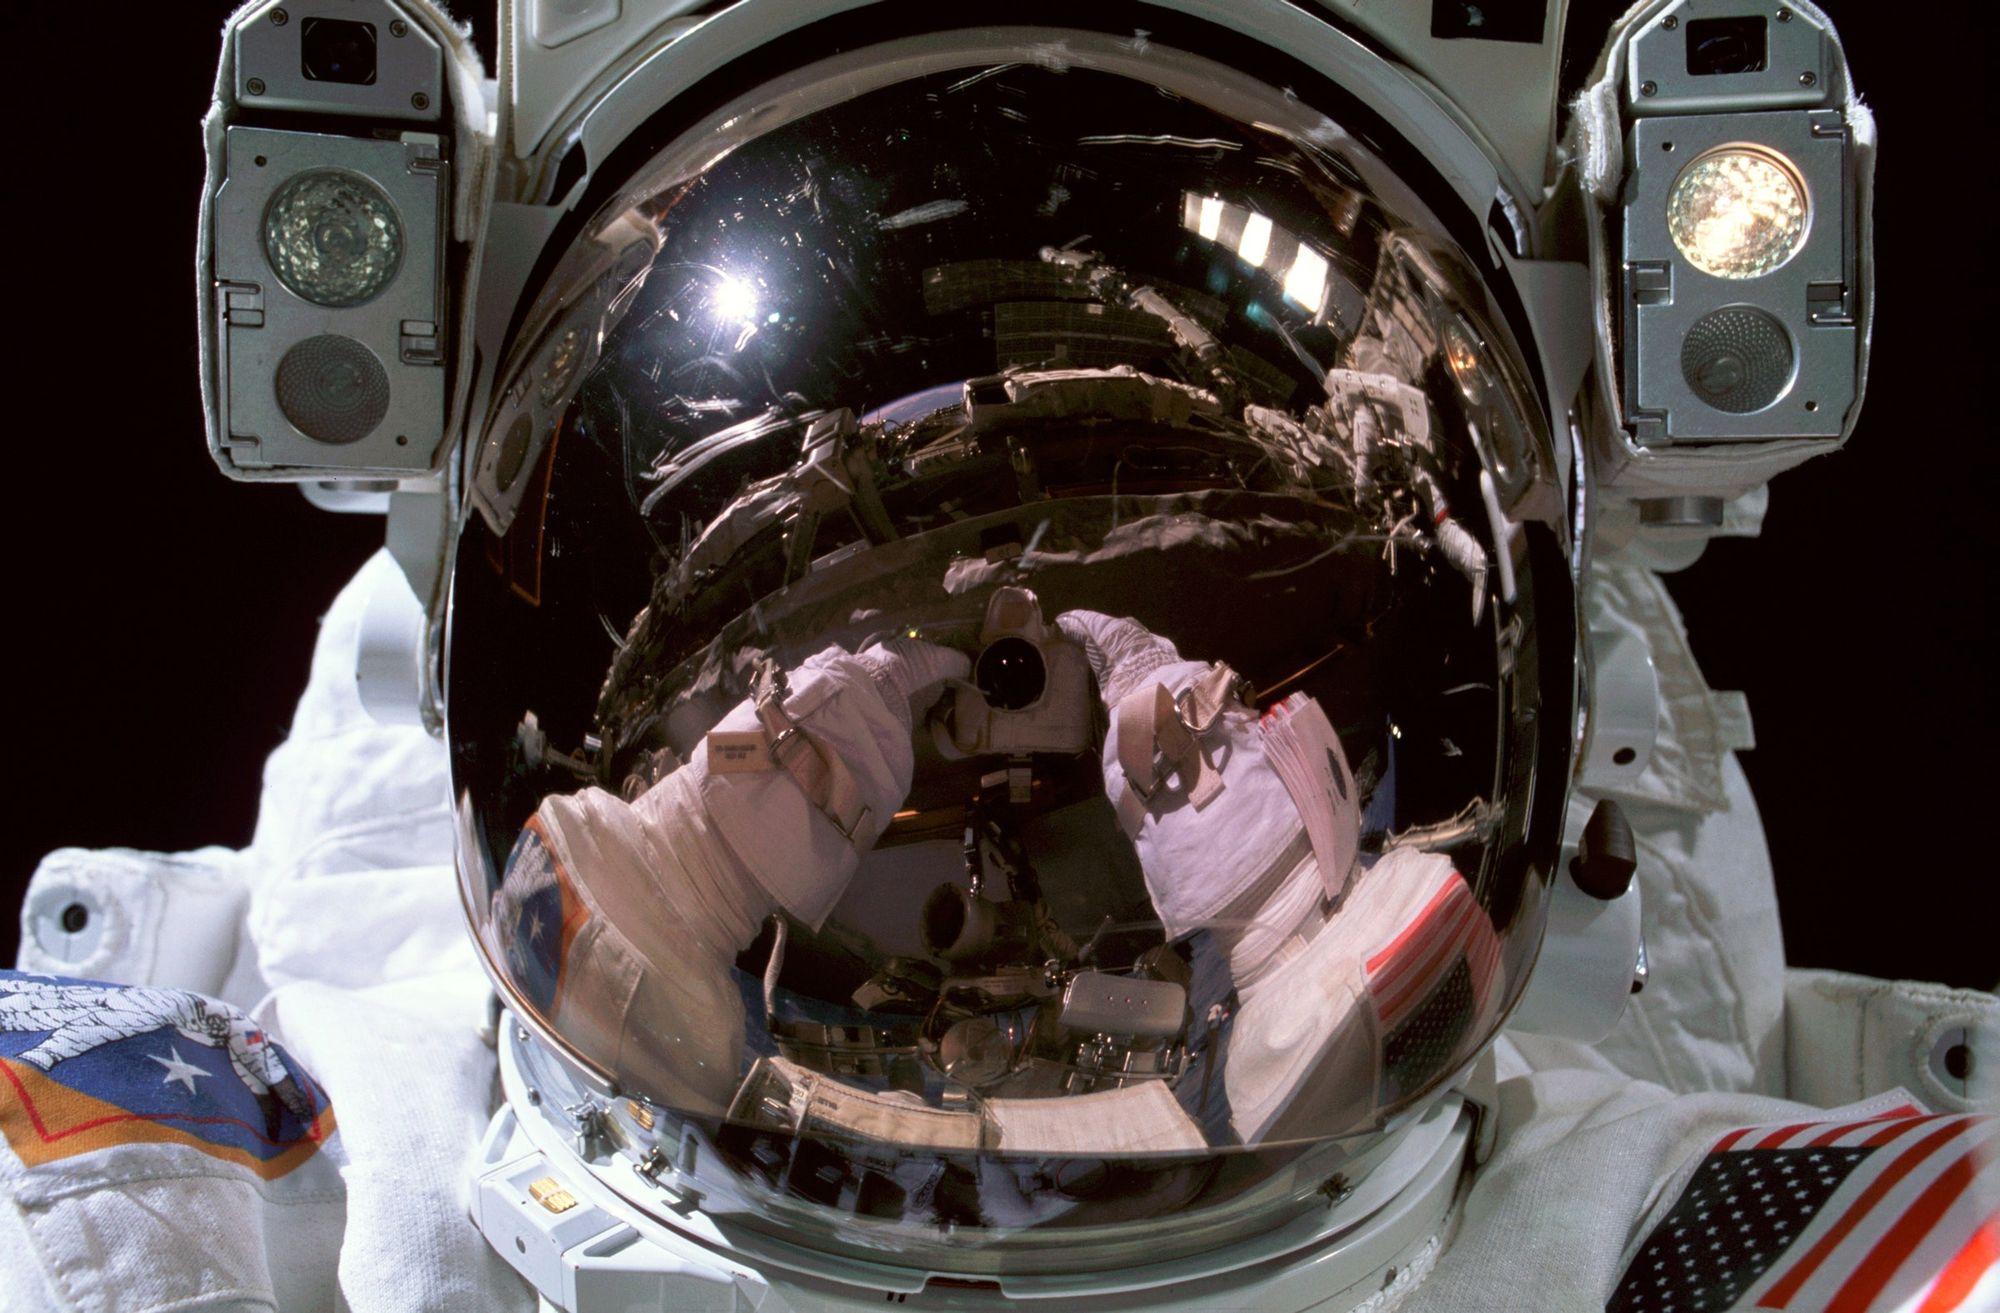 How a Zero-Gravity Omega Watch Repair Revolutionized NASA’s Space Station Fixes | WIRED